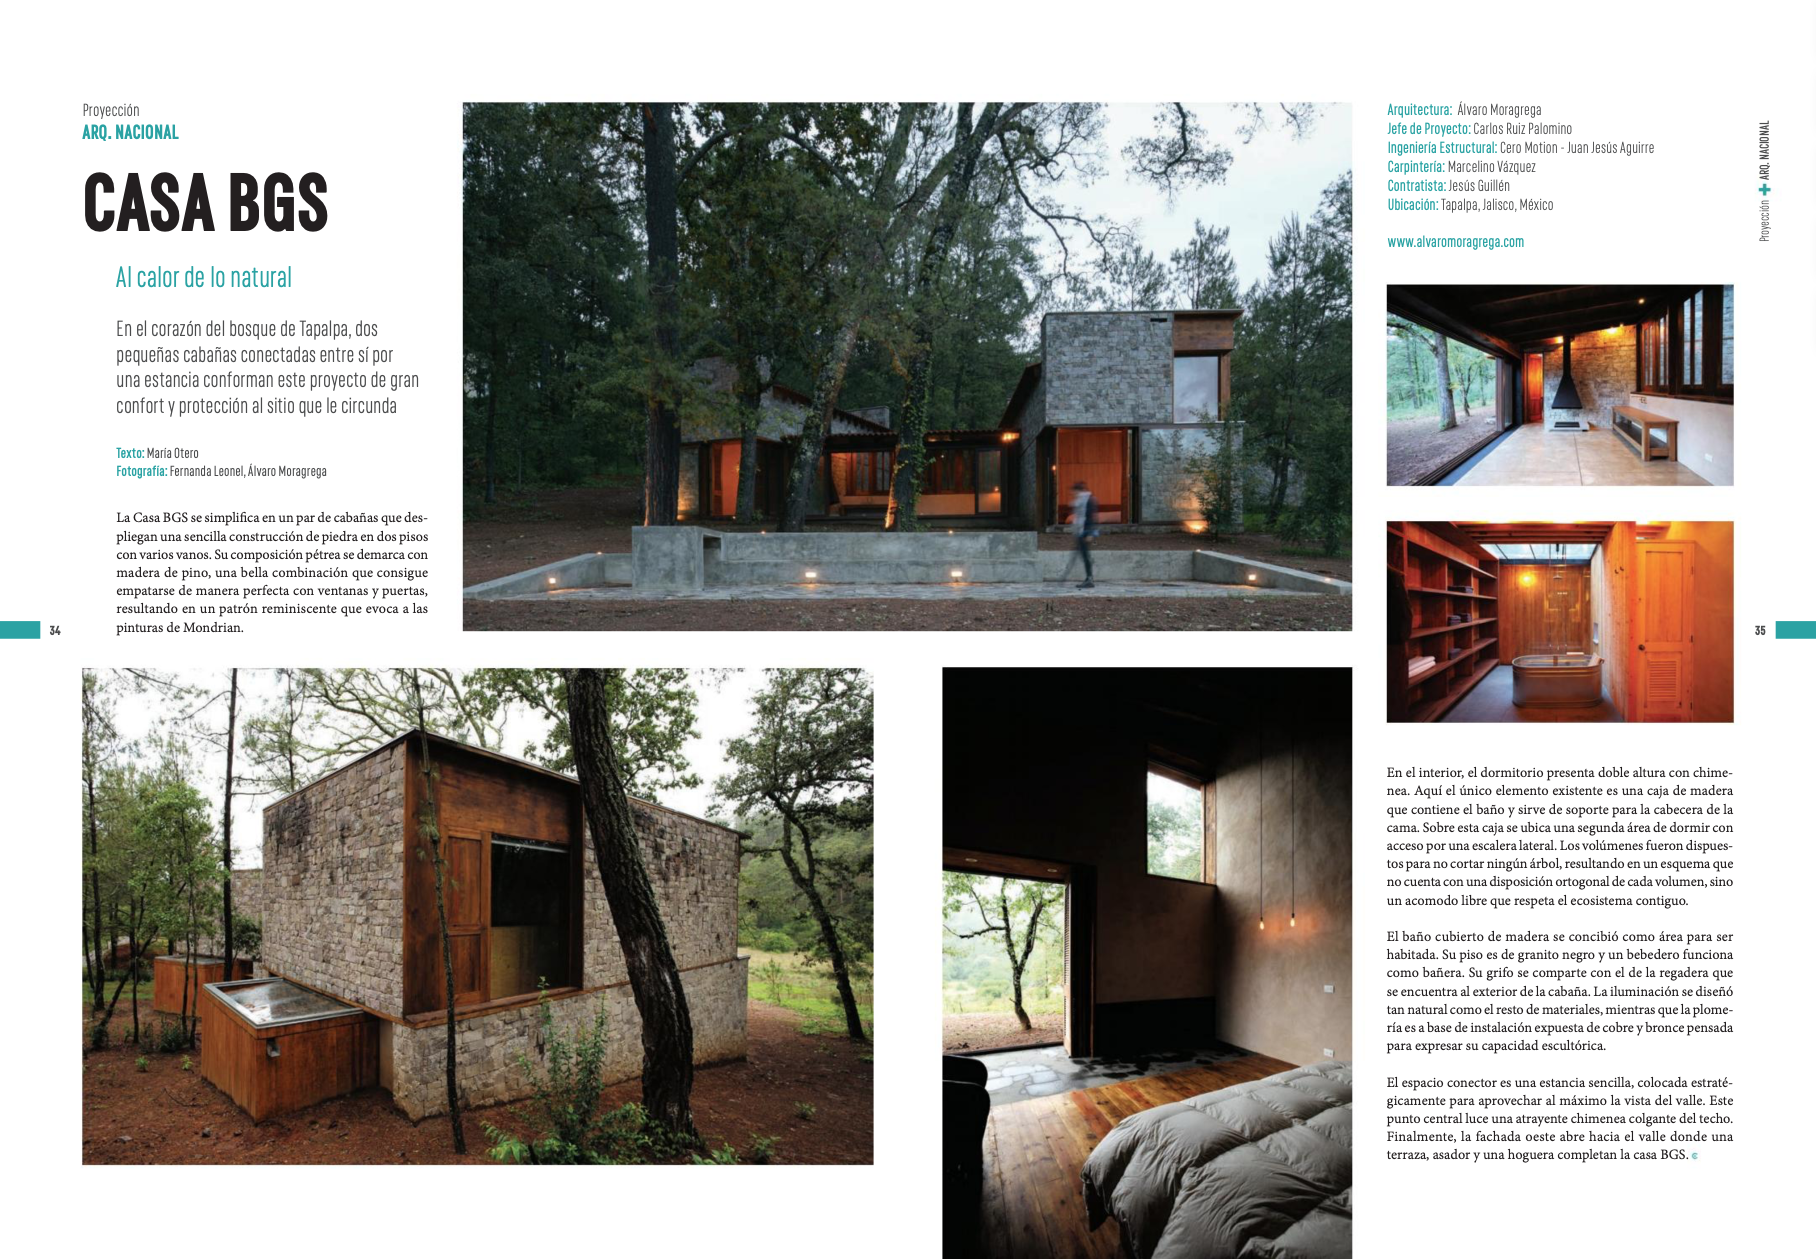 C+T dedicates a few pages to Casa BGS